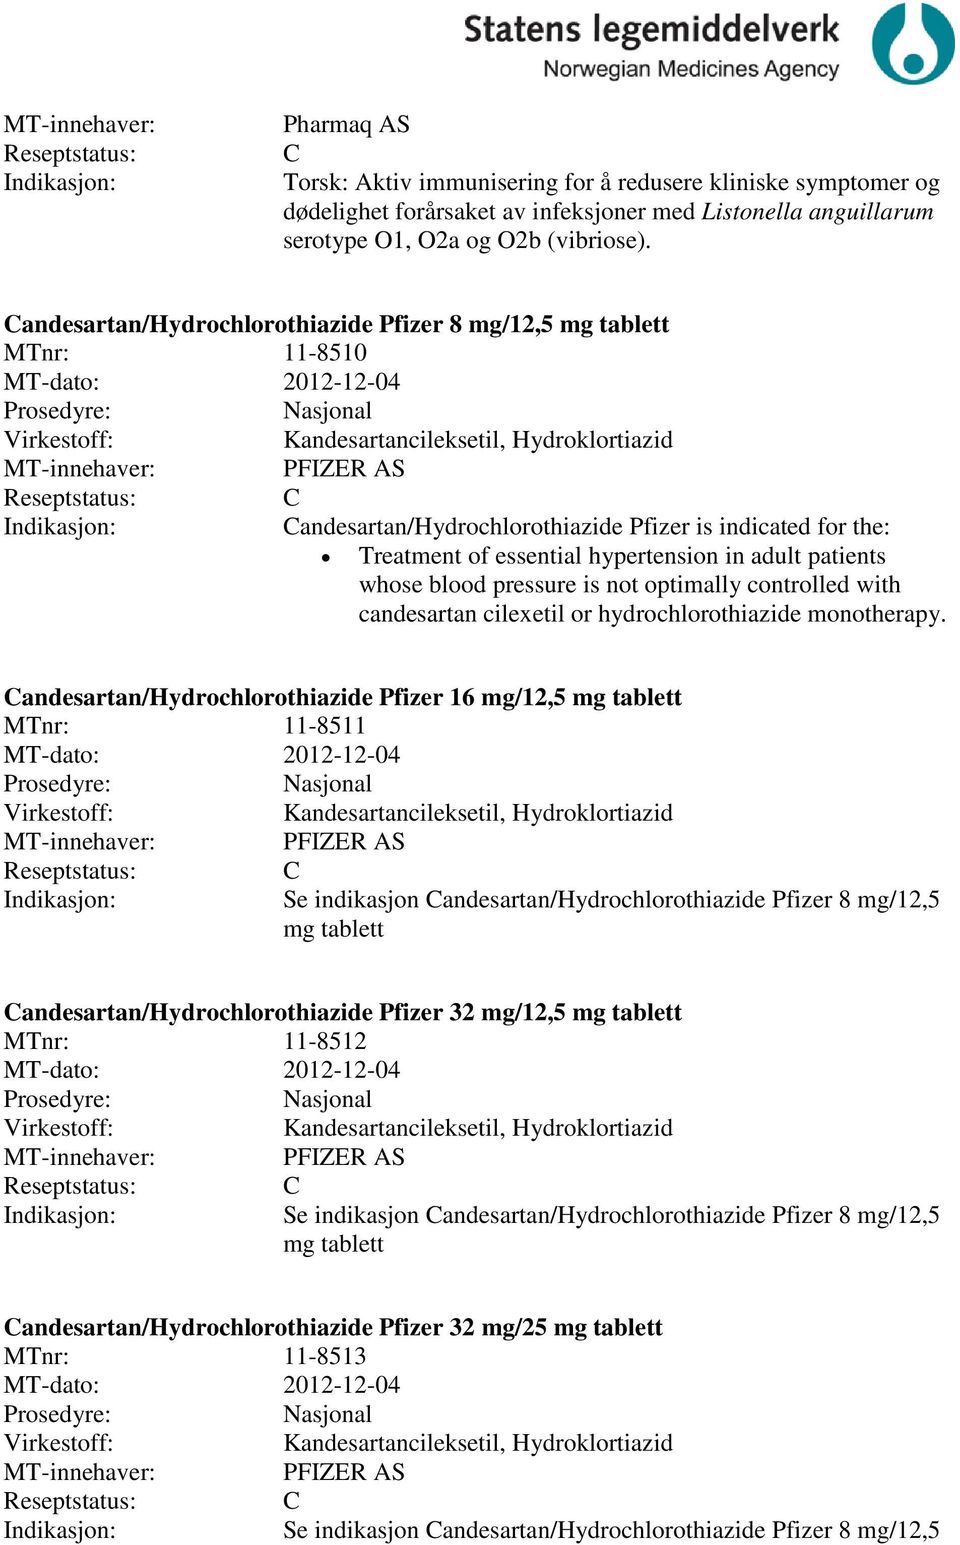 hypertension in adult patients whose blood pressure is not optimally controlled with candesartan cilexetil or hydrochlorothiazide monotherapy.